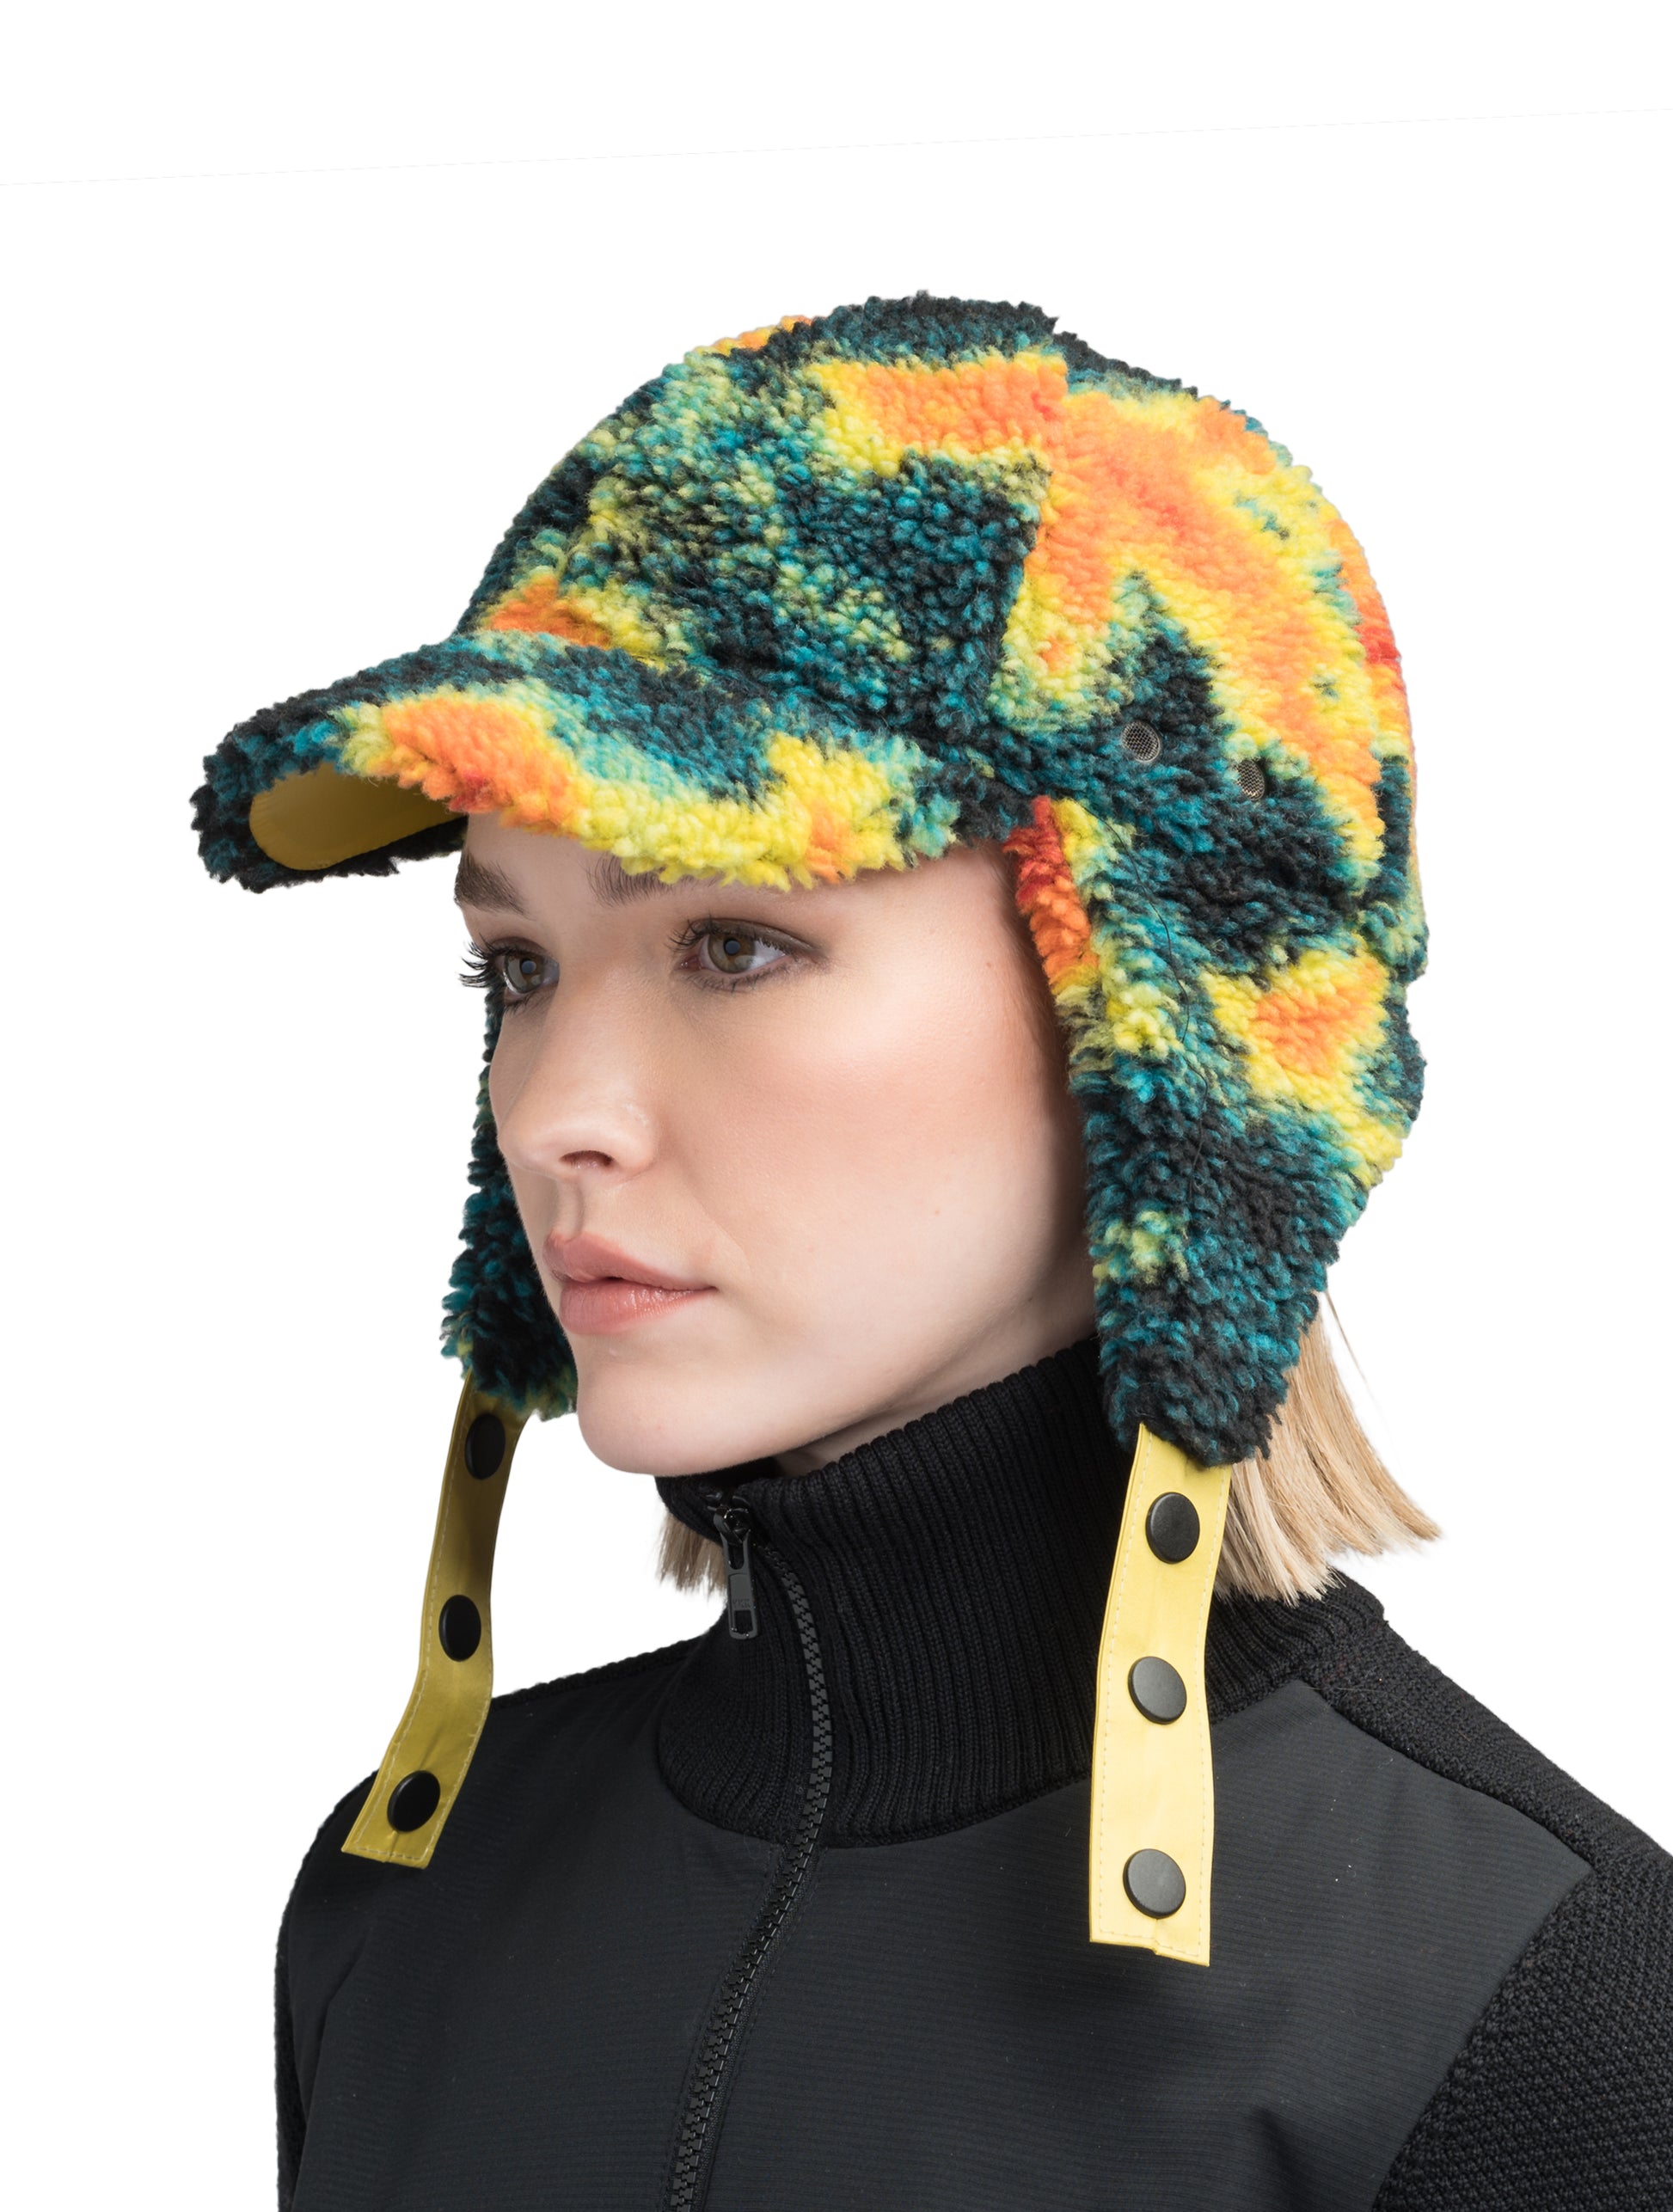 Knox Unisex Berber Ball Cap with Ear Flaps in premium berber fabrication at body, with premium cire technical nylon taffeta at straps and underbrim, ear flaps with adjustable snap button closure straps, and an elastic sweatband, in Heat Map